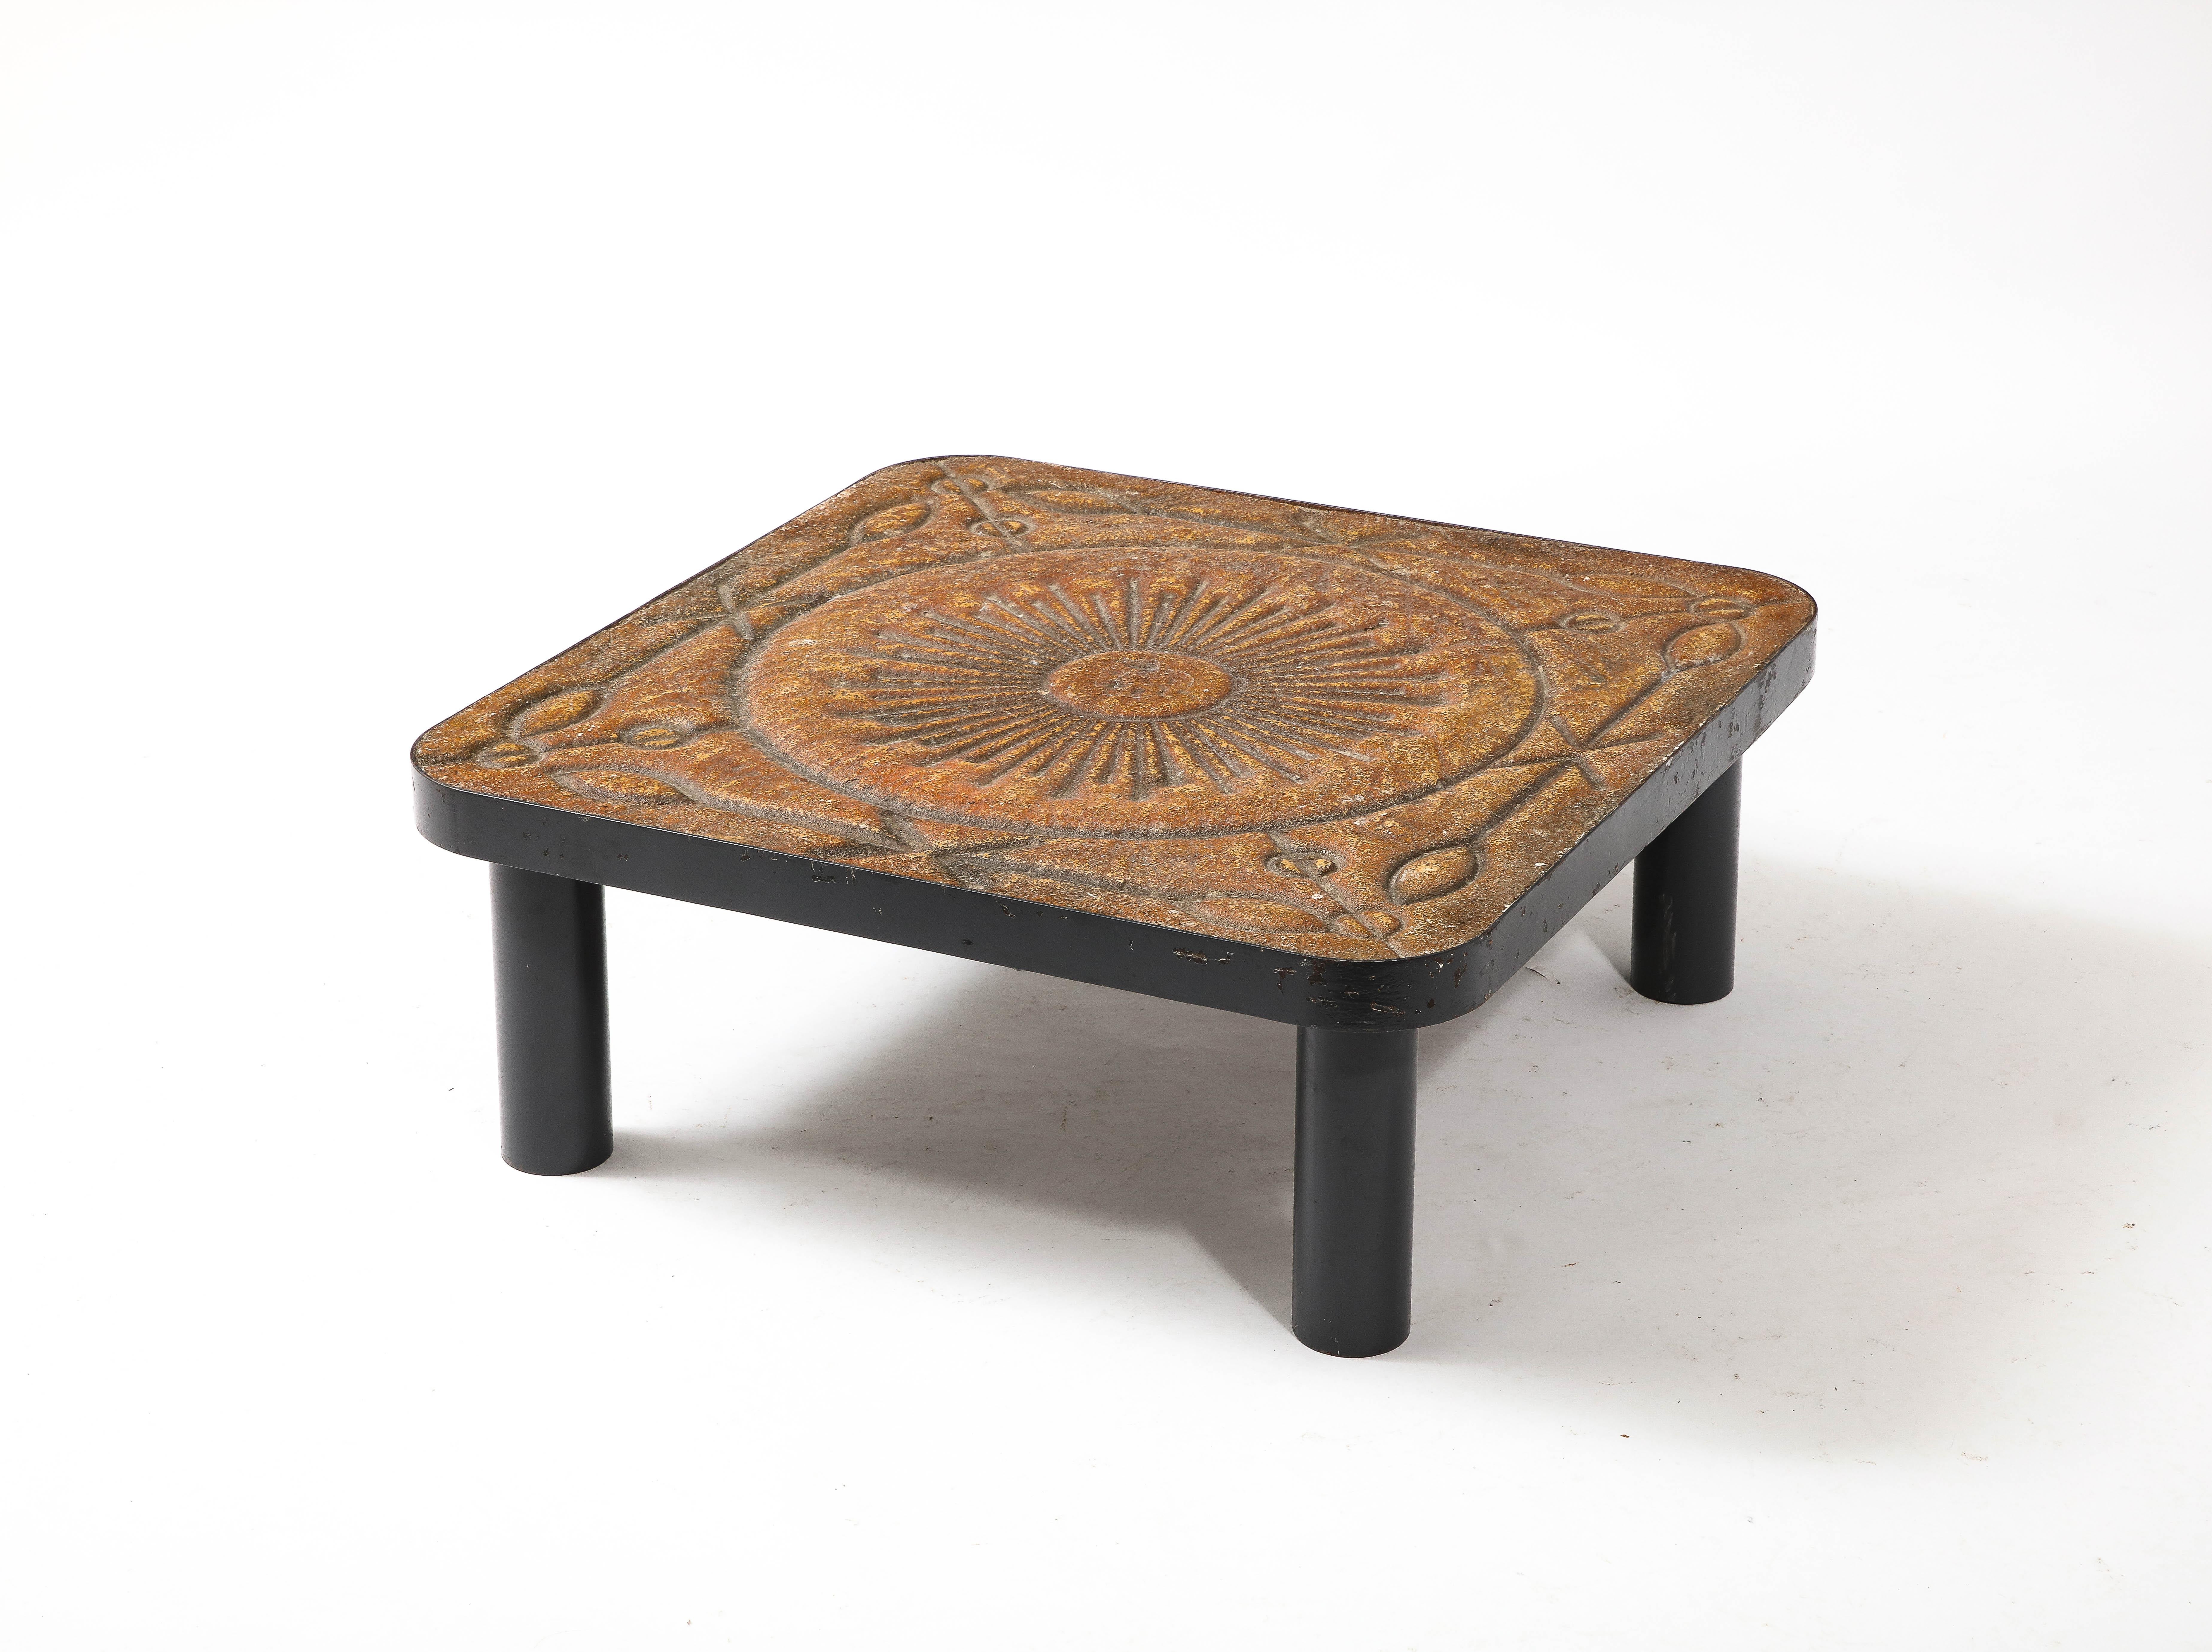 Steel and cast concrete coffee table, the concrete is dyed and patinated. Can be used outdoors. The legs can be removed for shipping.
